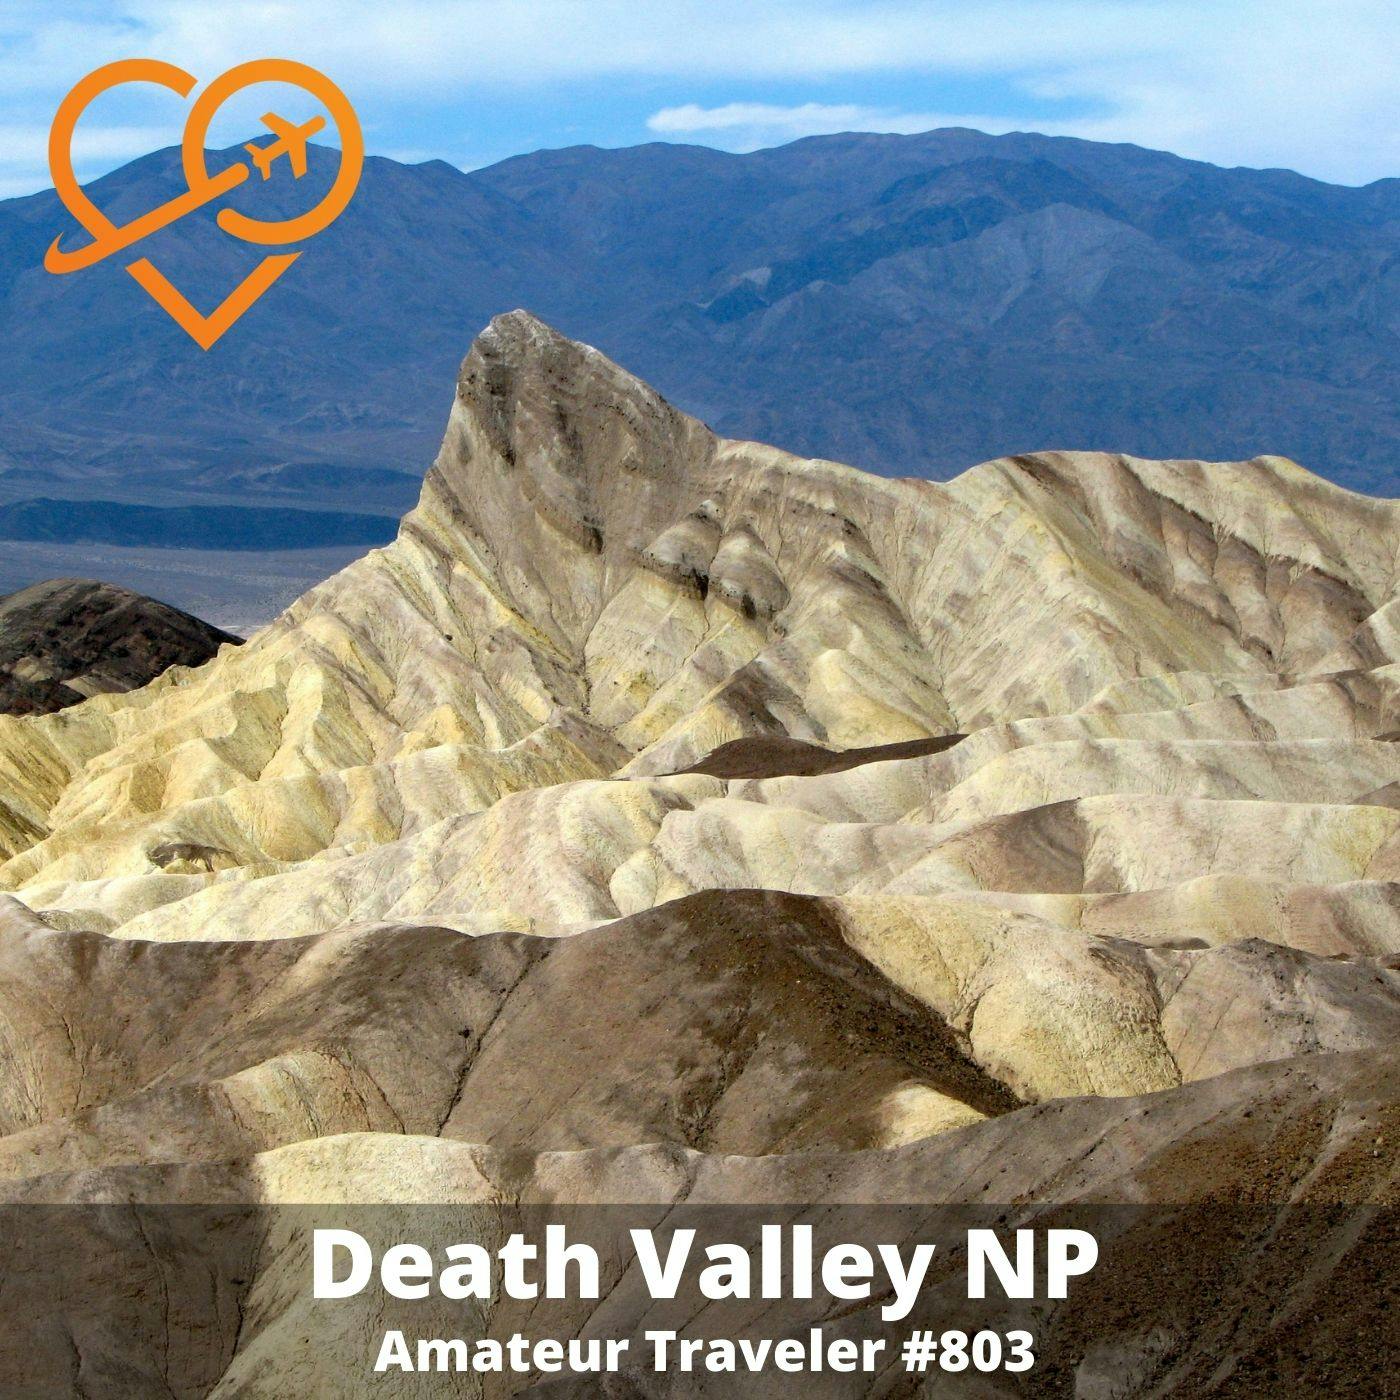 AT#803 - Travel to Death Valley National Park